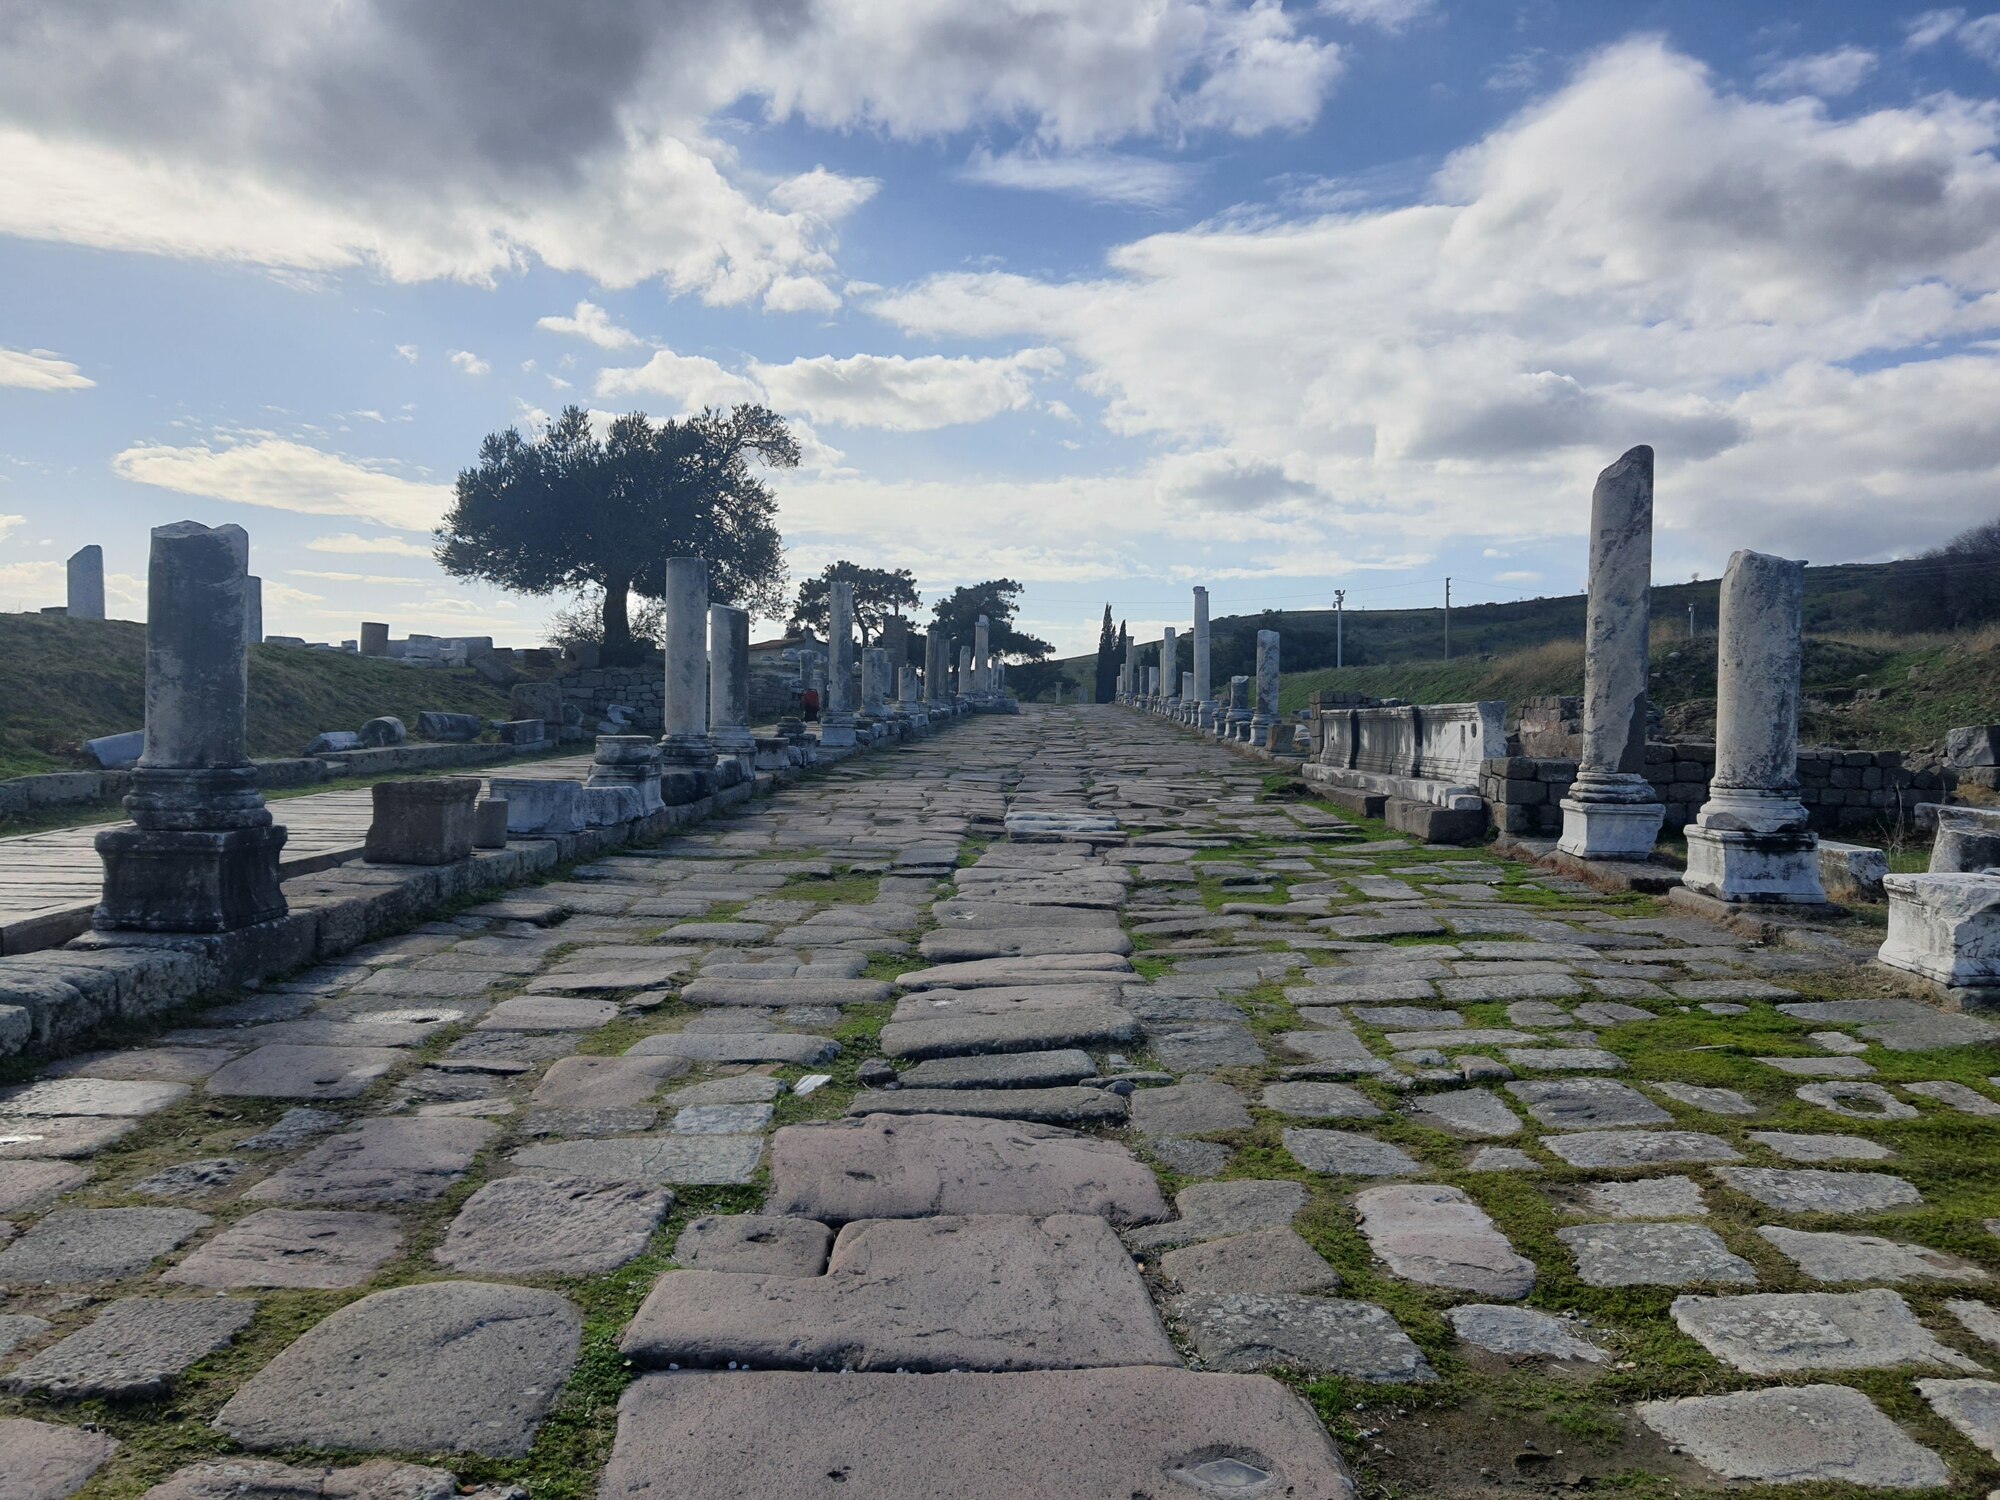 The sacred road in Asclepion located in Pergamon, Türkiye, the city of many firsts, Jan. 21, 2023.